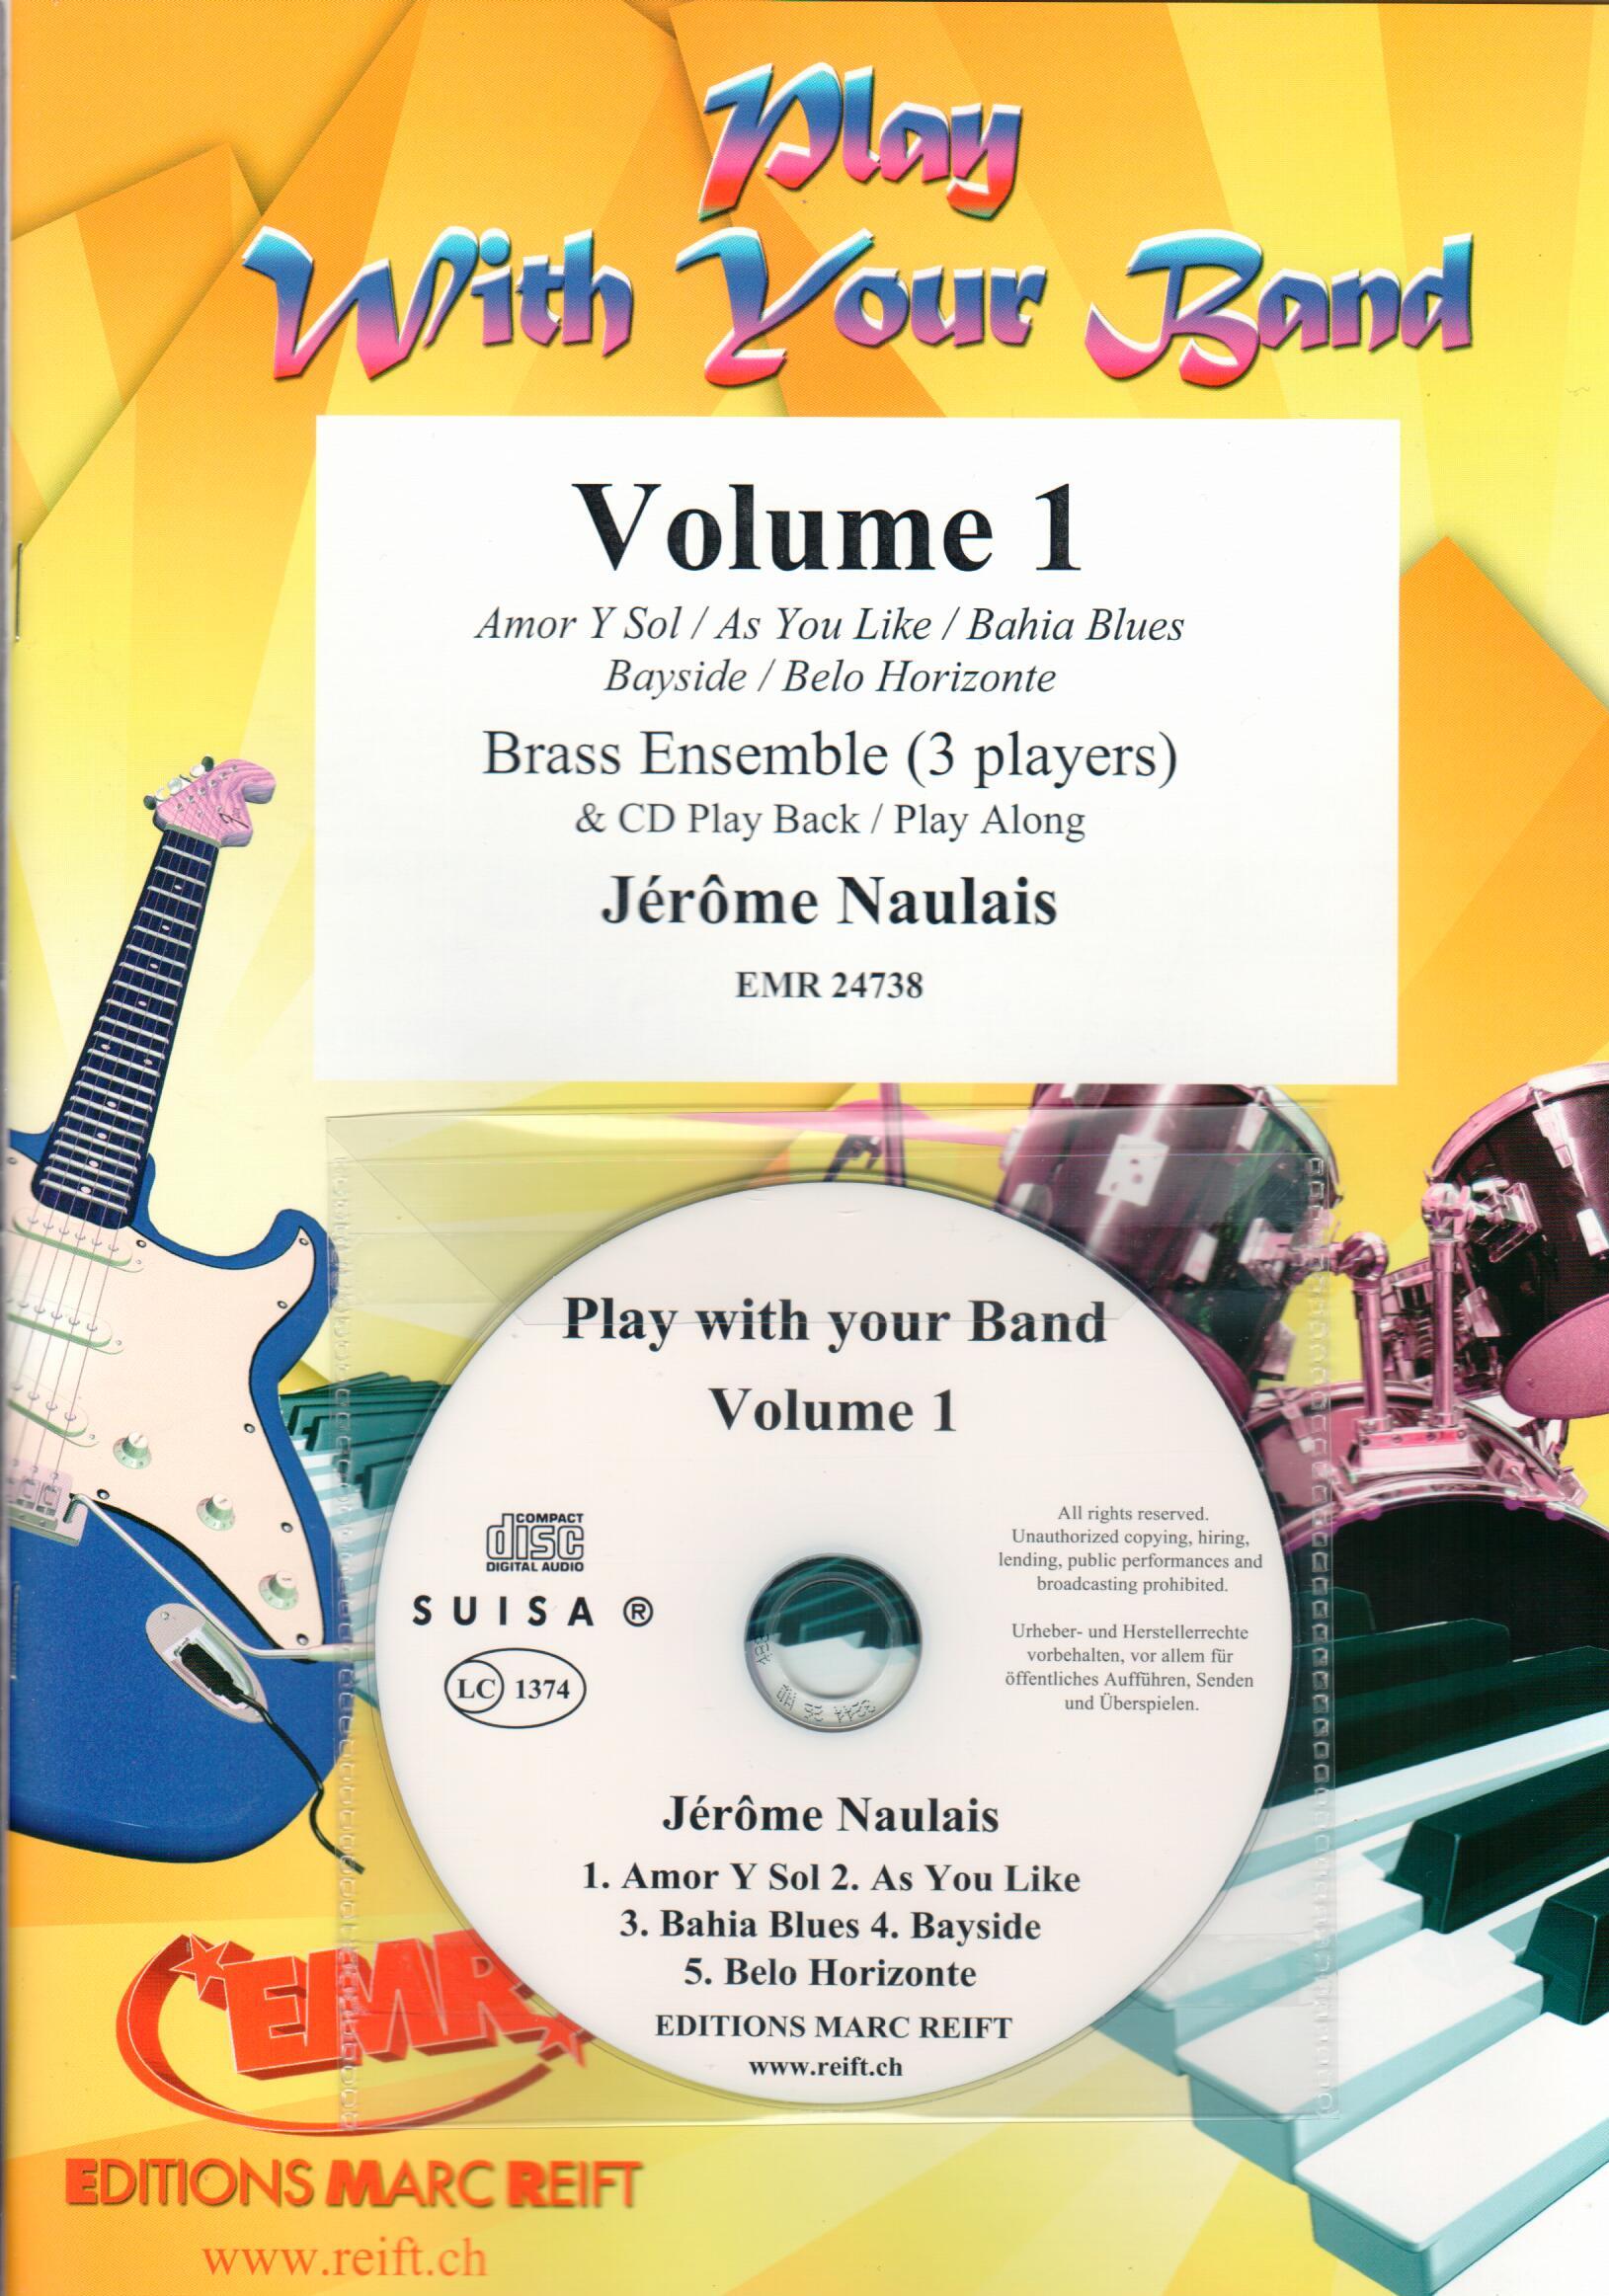 PLAY WITH YOUR BAND VOLUME 1, Trios